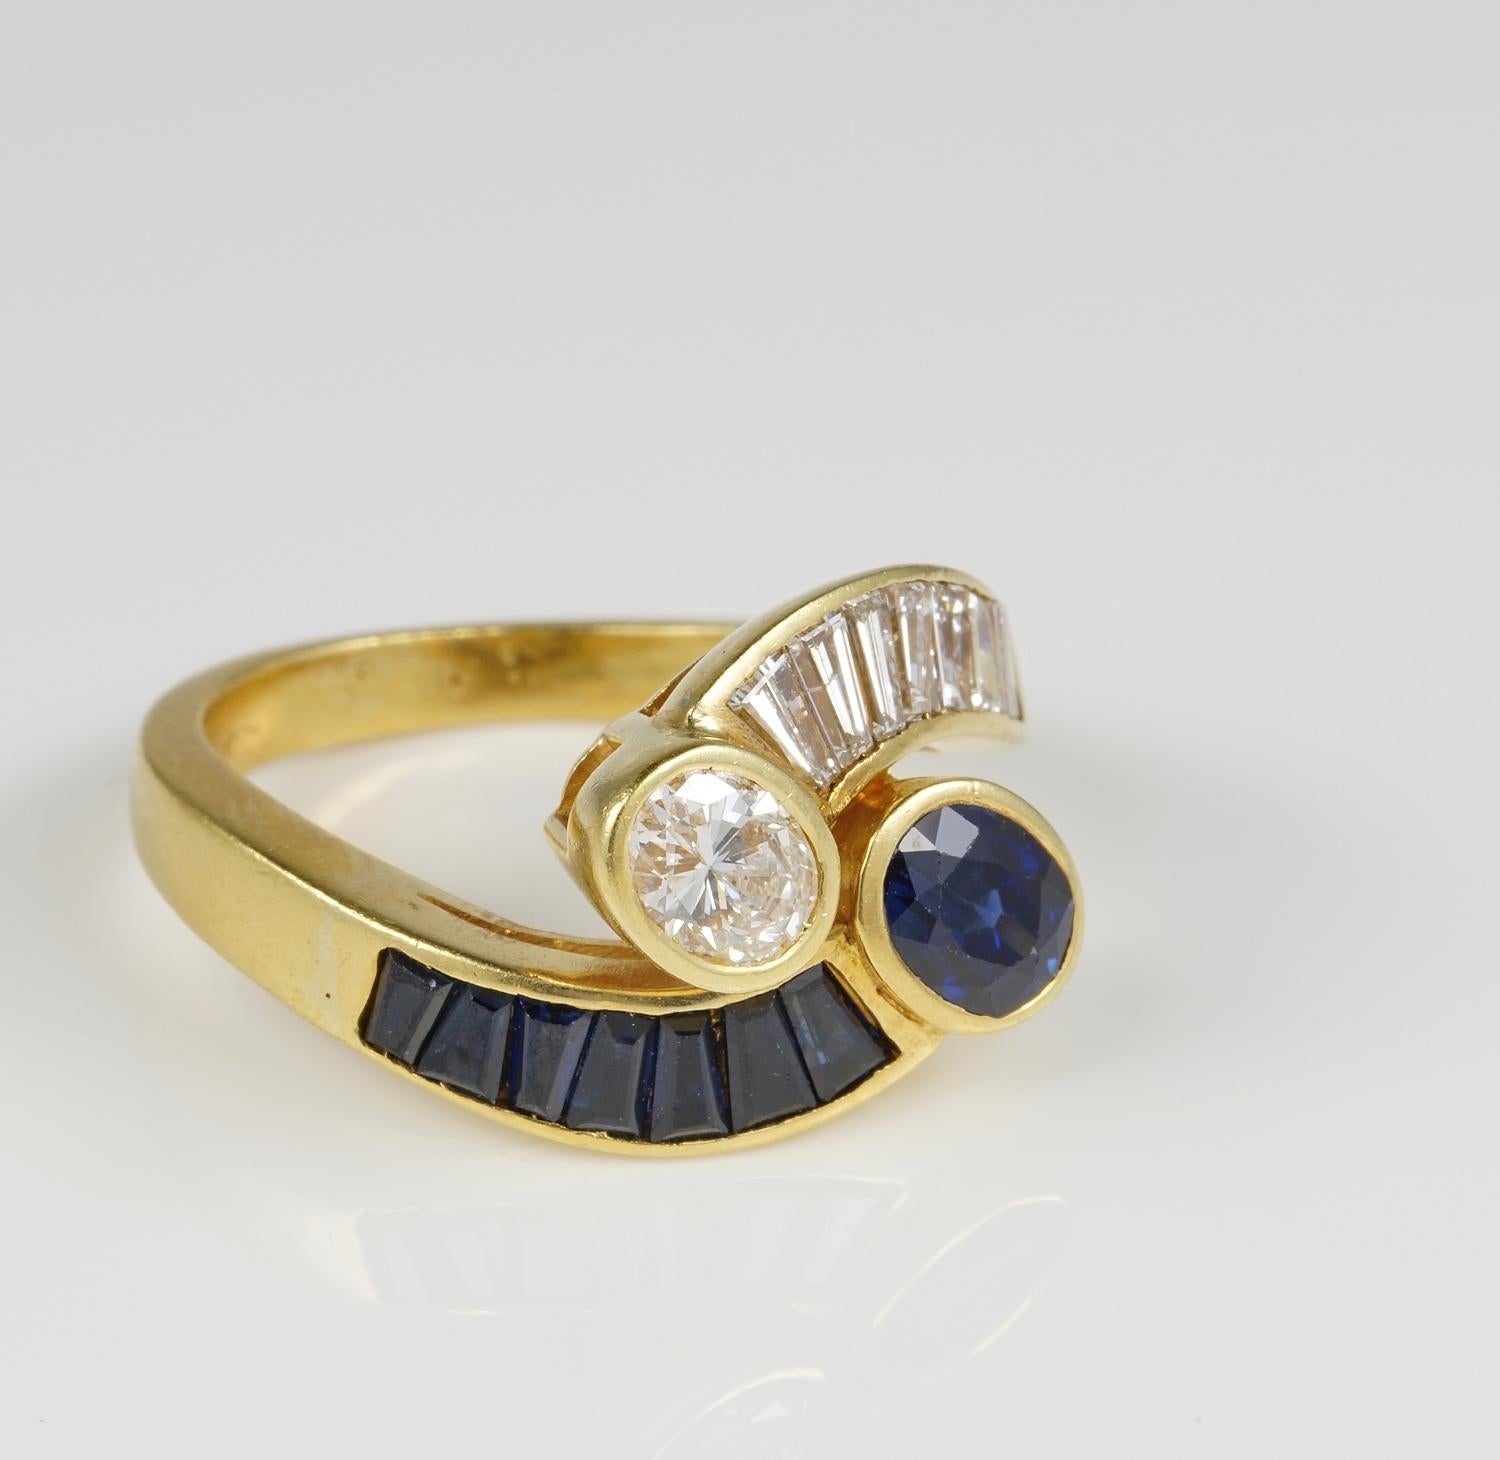 This outstanding bypass ring is superbly hand crafted as individual piece during 1960 ca. Opulent amount of extremely fine gemstones selected at the time by a master crafter to make it - 18 KT - marked with assay and maker marktferThe ring has a